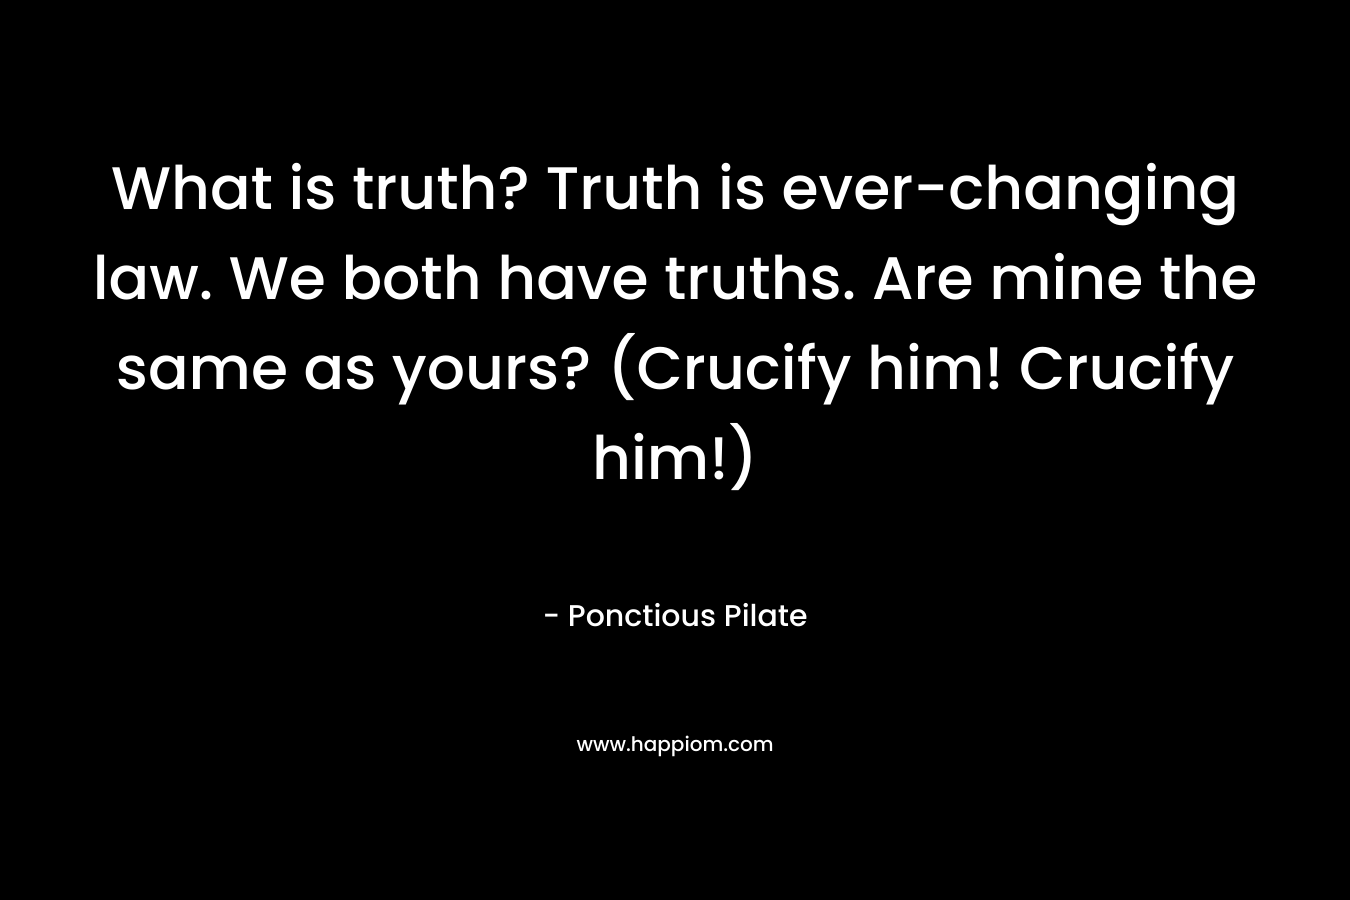 What is truth? Truth is ever-changing law. We both have truths. Are mine the same as yours? (Crucify him! Crucify him!) – Ponctious Pilate